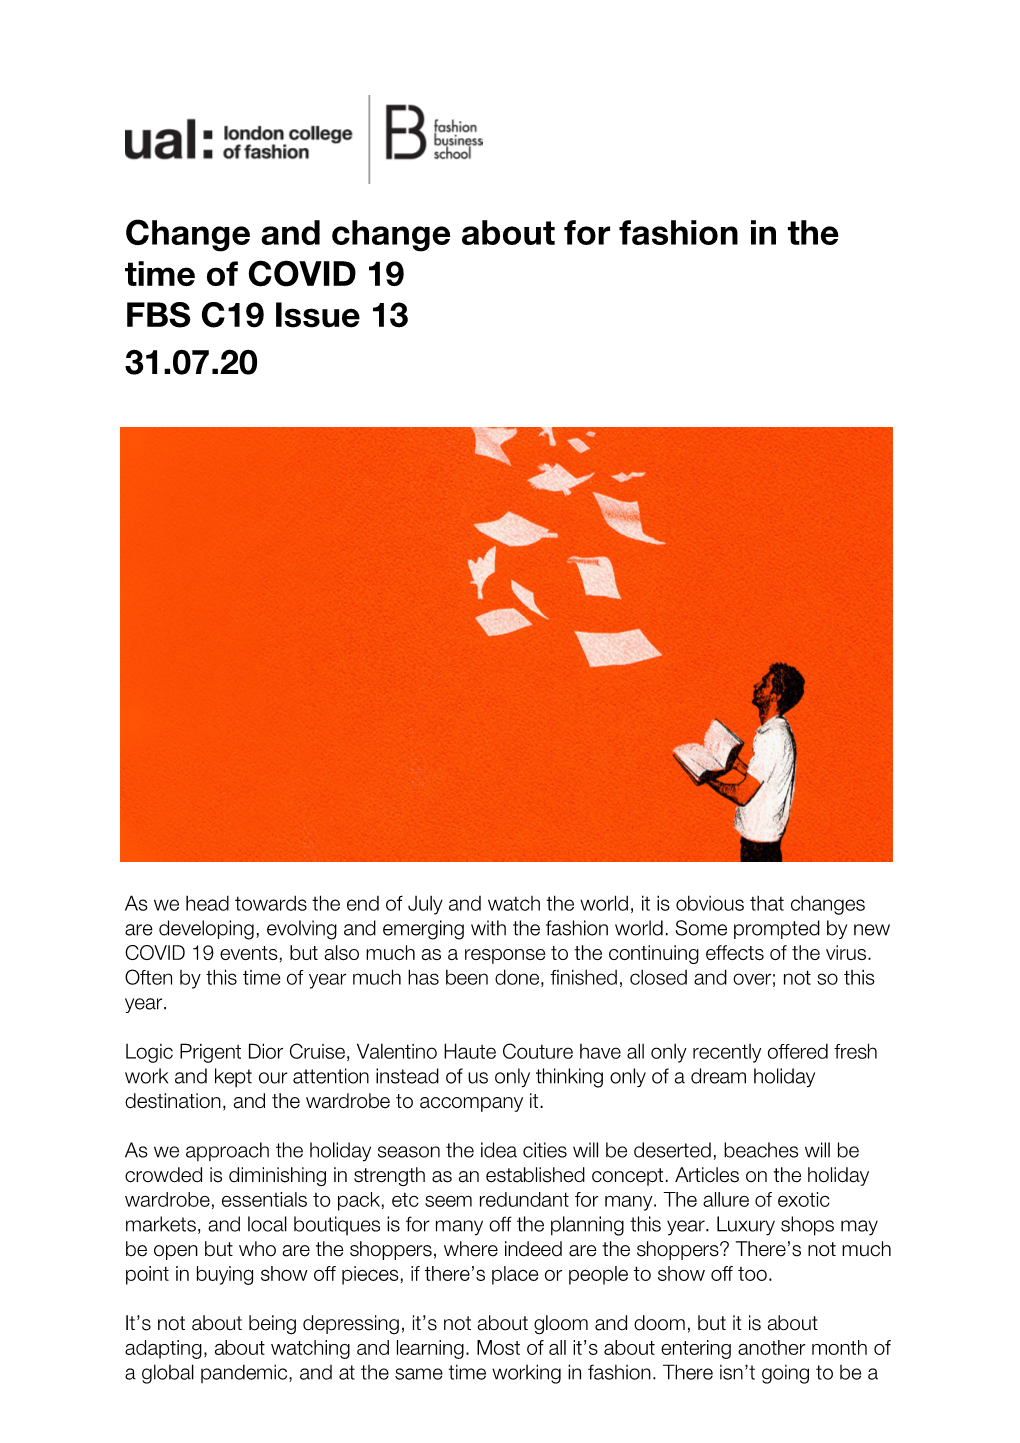 Change and Change About for Fashion in the Time of COVID 19 FBS C19 Issue 13 31.07.20